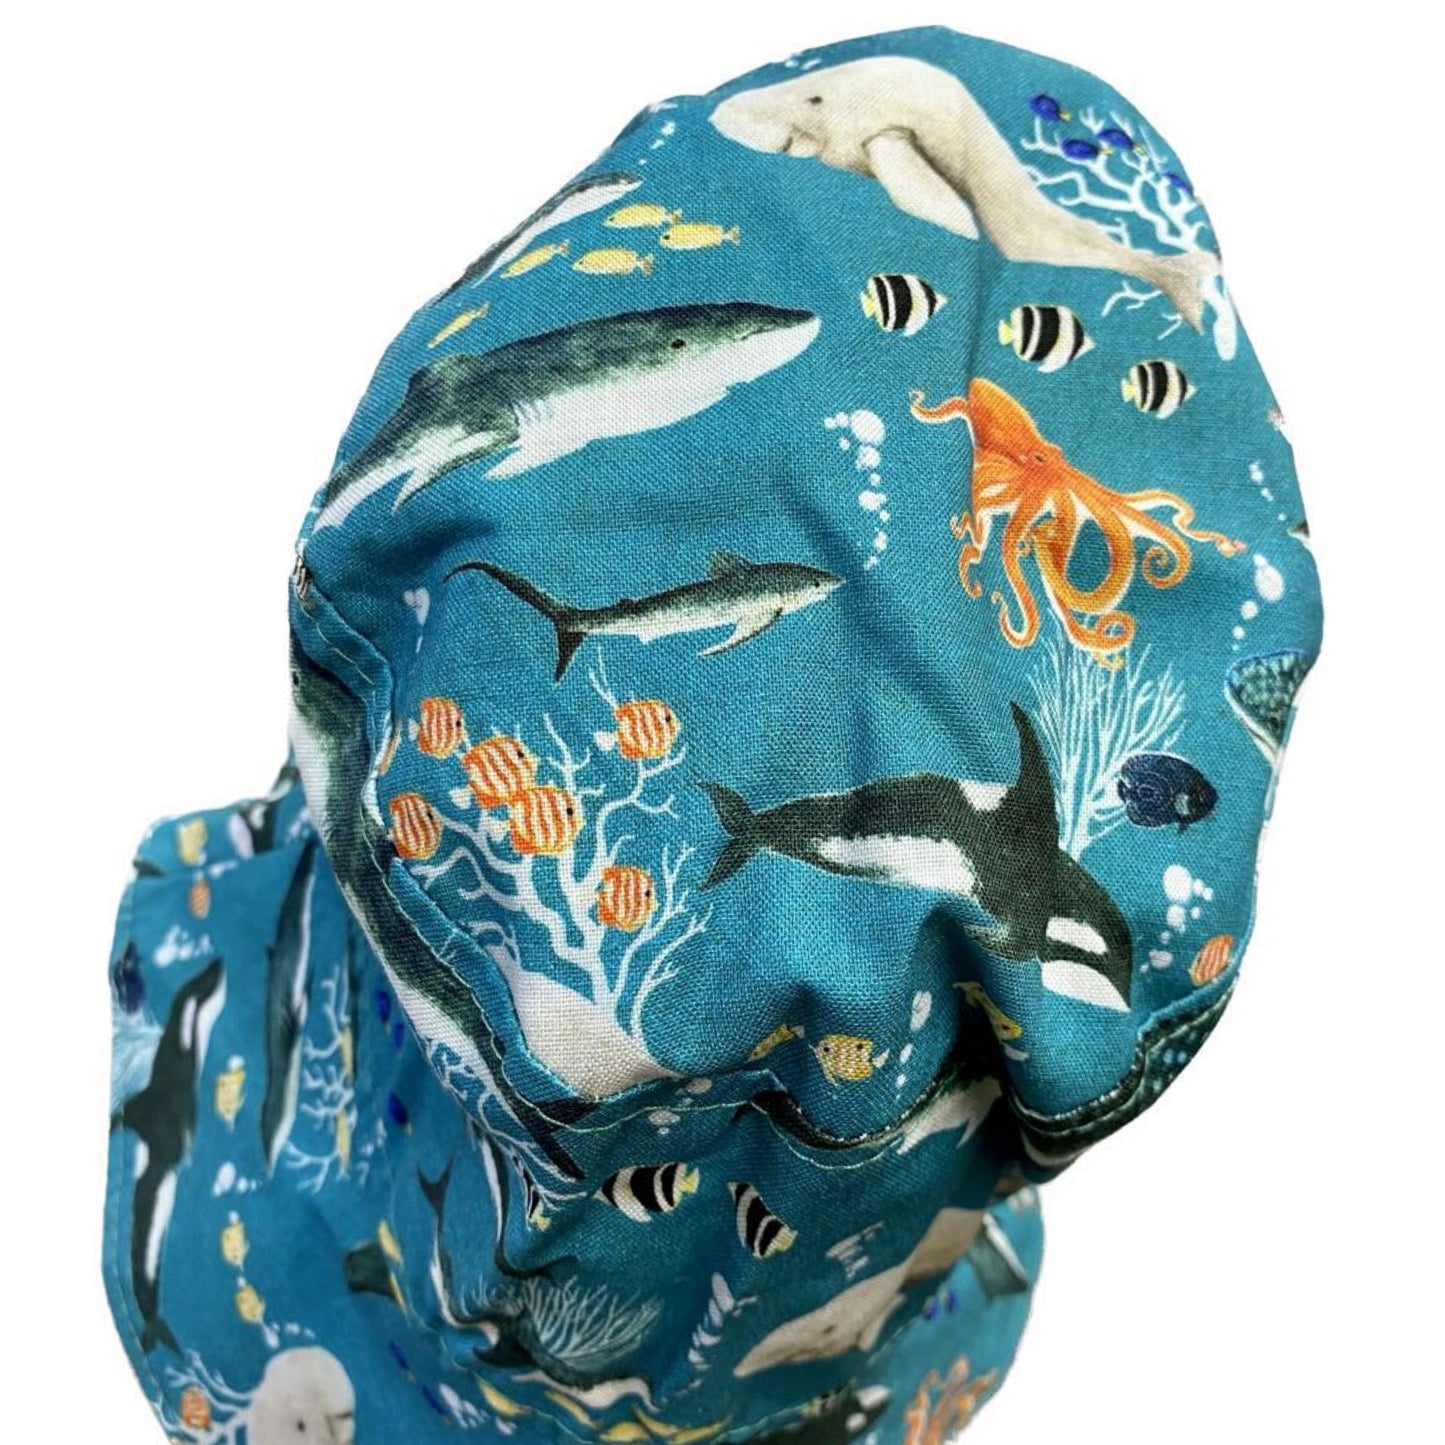 Teacups n Quilts- Whale Sharks, Dugongs & Octopi Fabric Hat - Kids Size Small